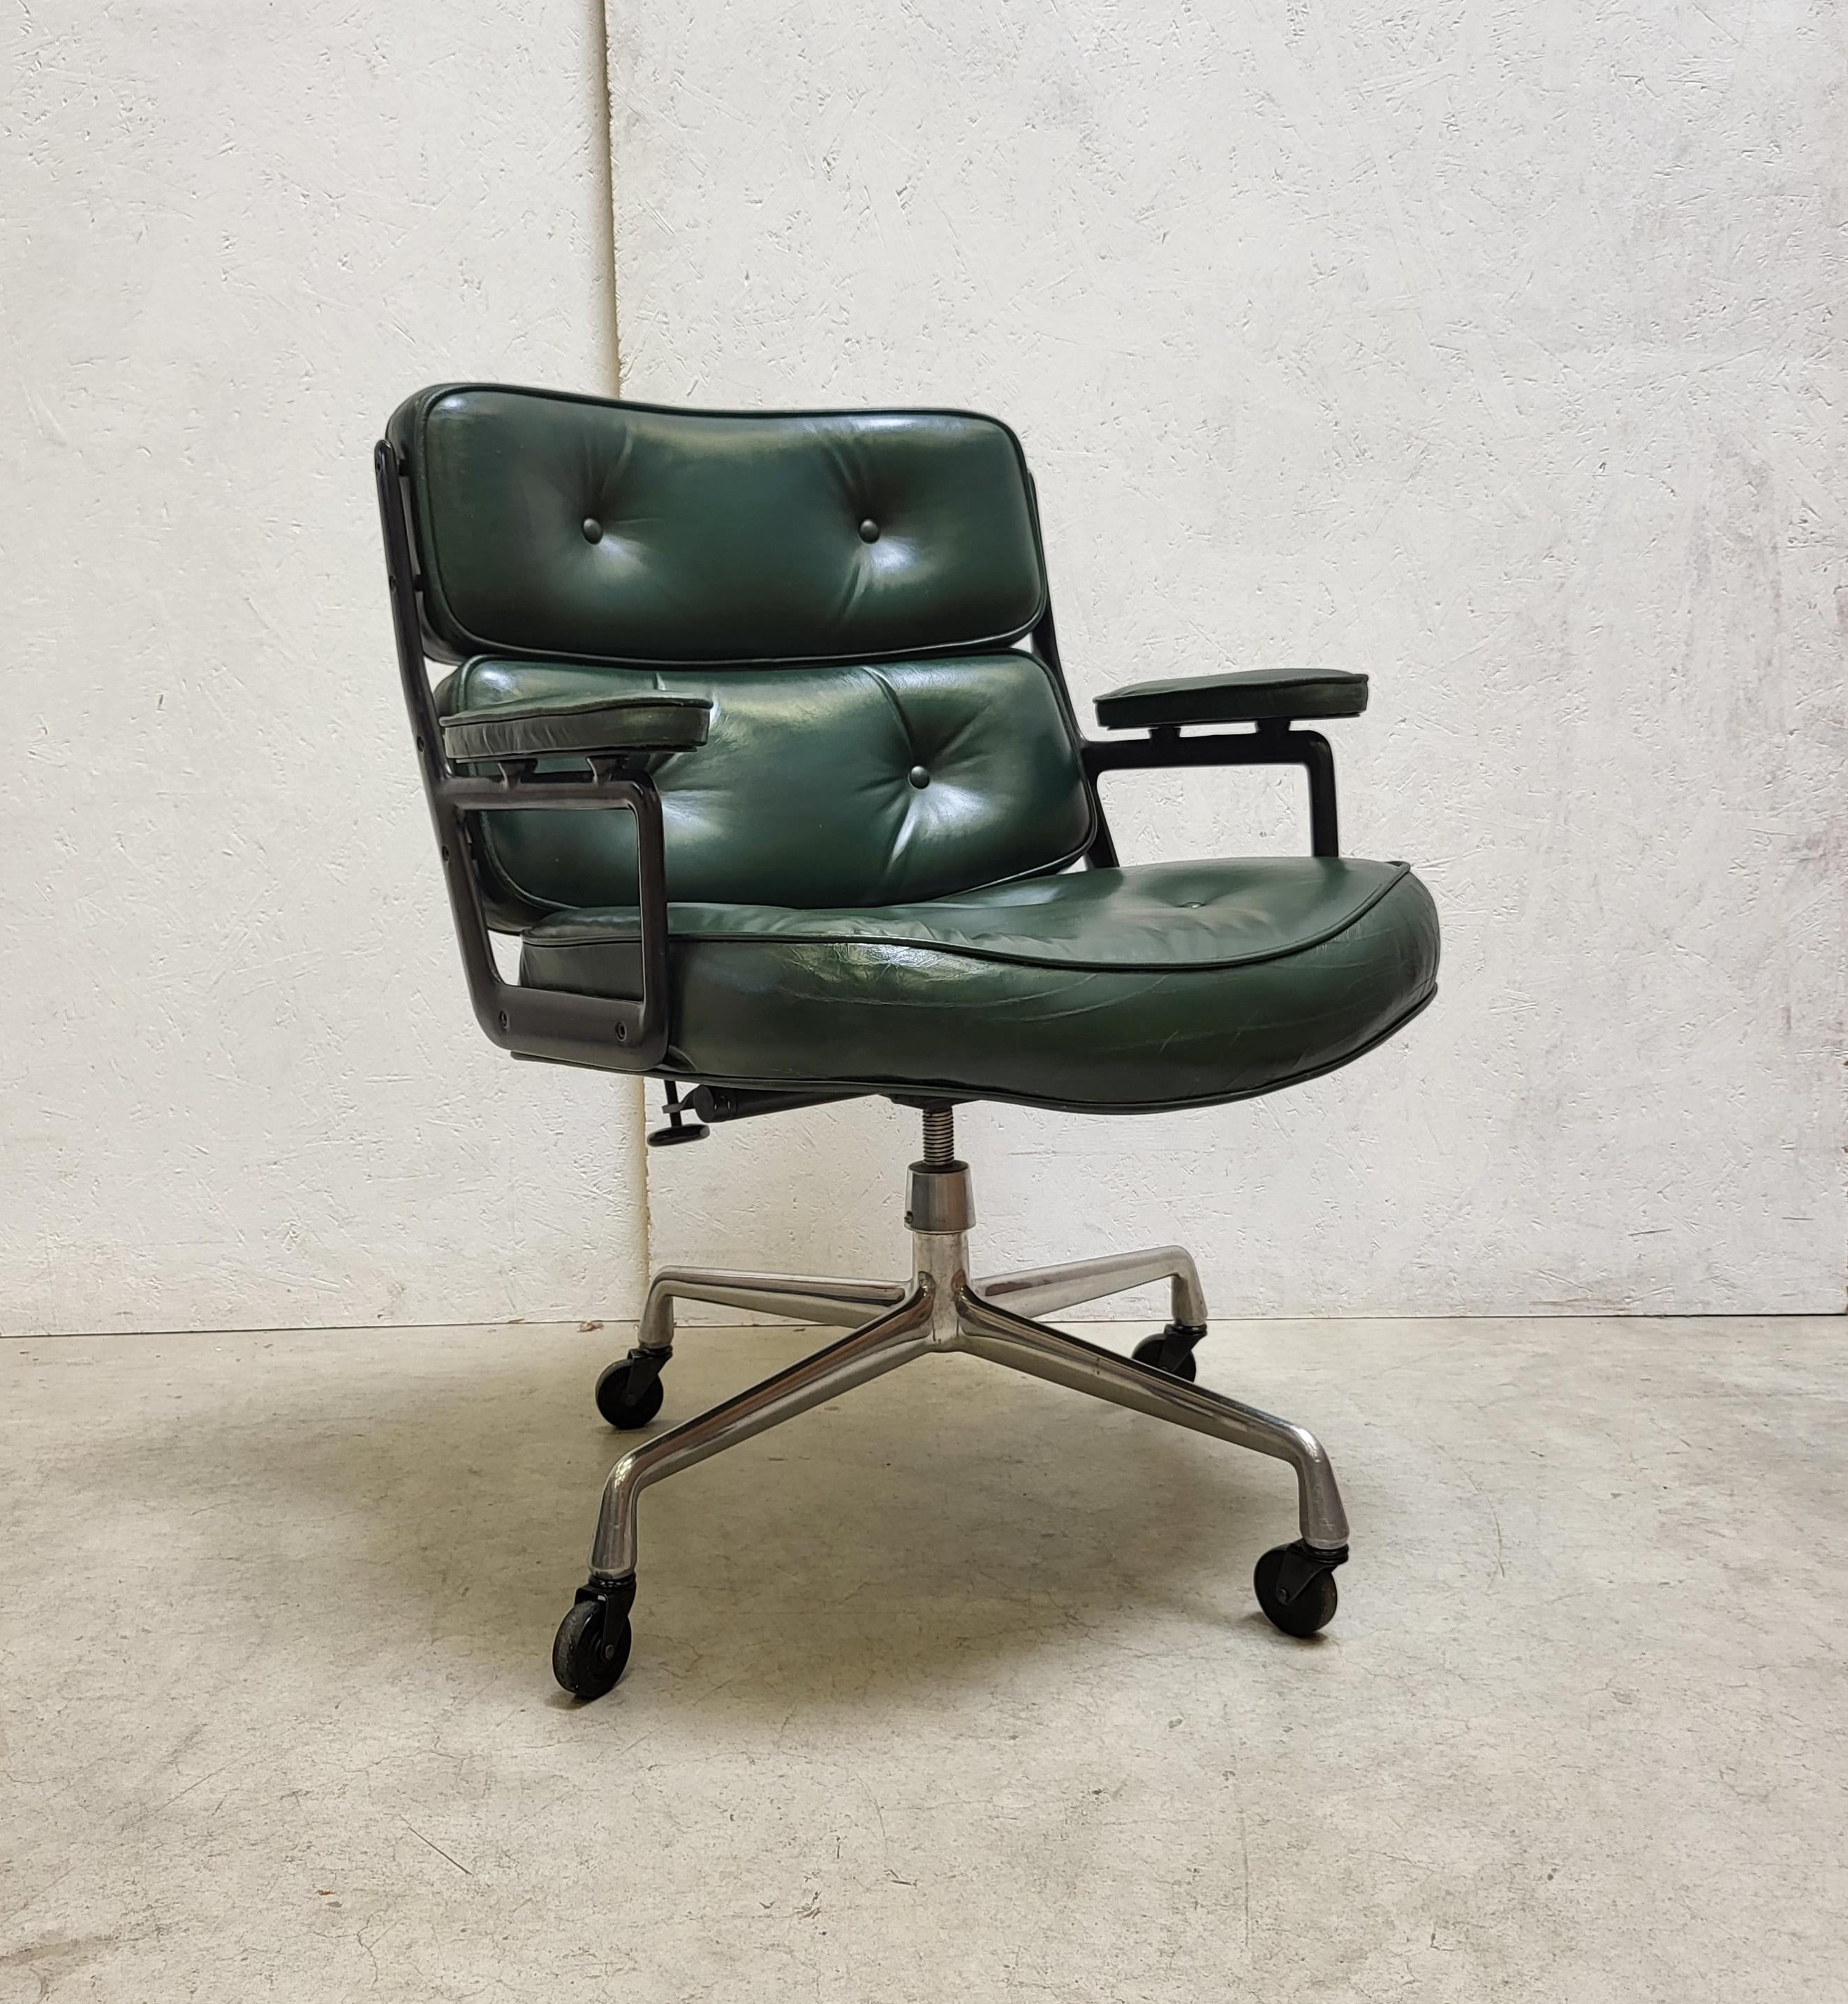 Rare green Lobby Chair model ES107 produced by Herman Miller. 
The chair features a black aluminium frame on a polished aluminium base.
Very rare colour combination and the wider ES107 edition.

The chair features a tilt mechanism and is height